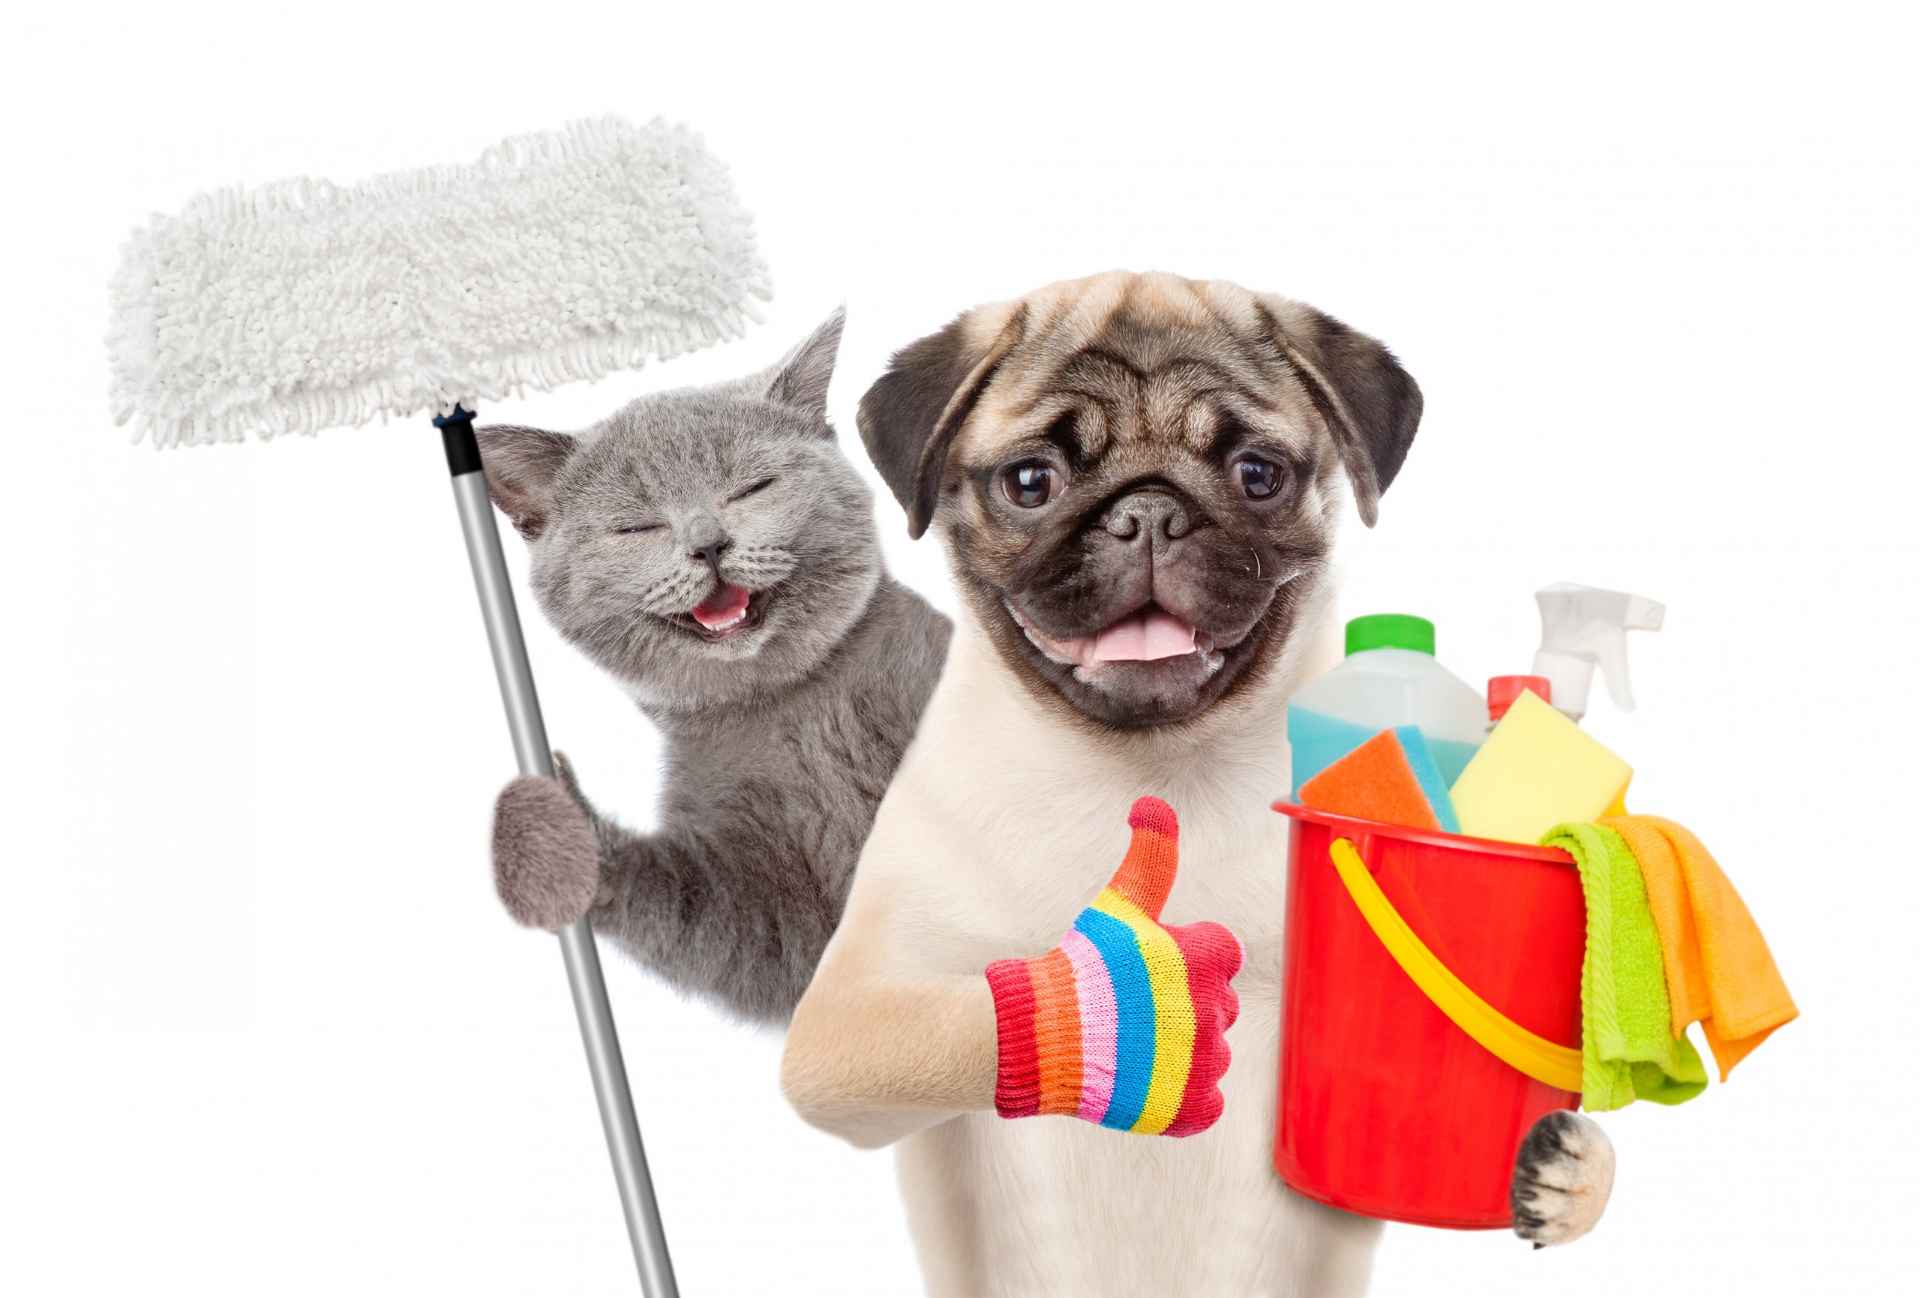 Picture for category Cleaning & Household Supplies